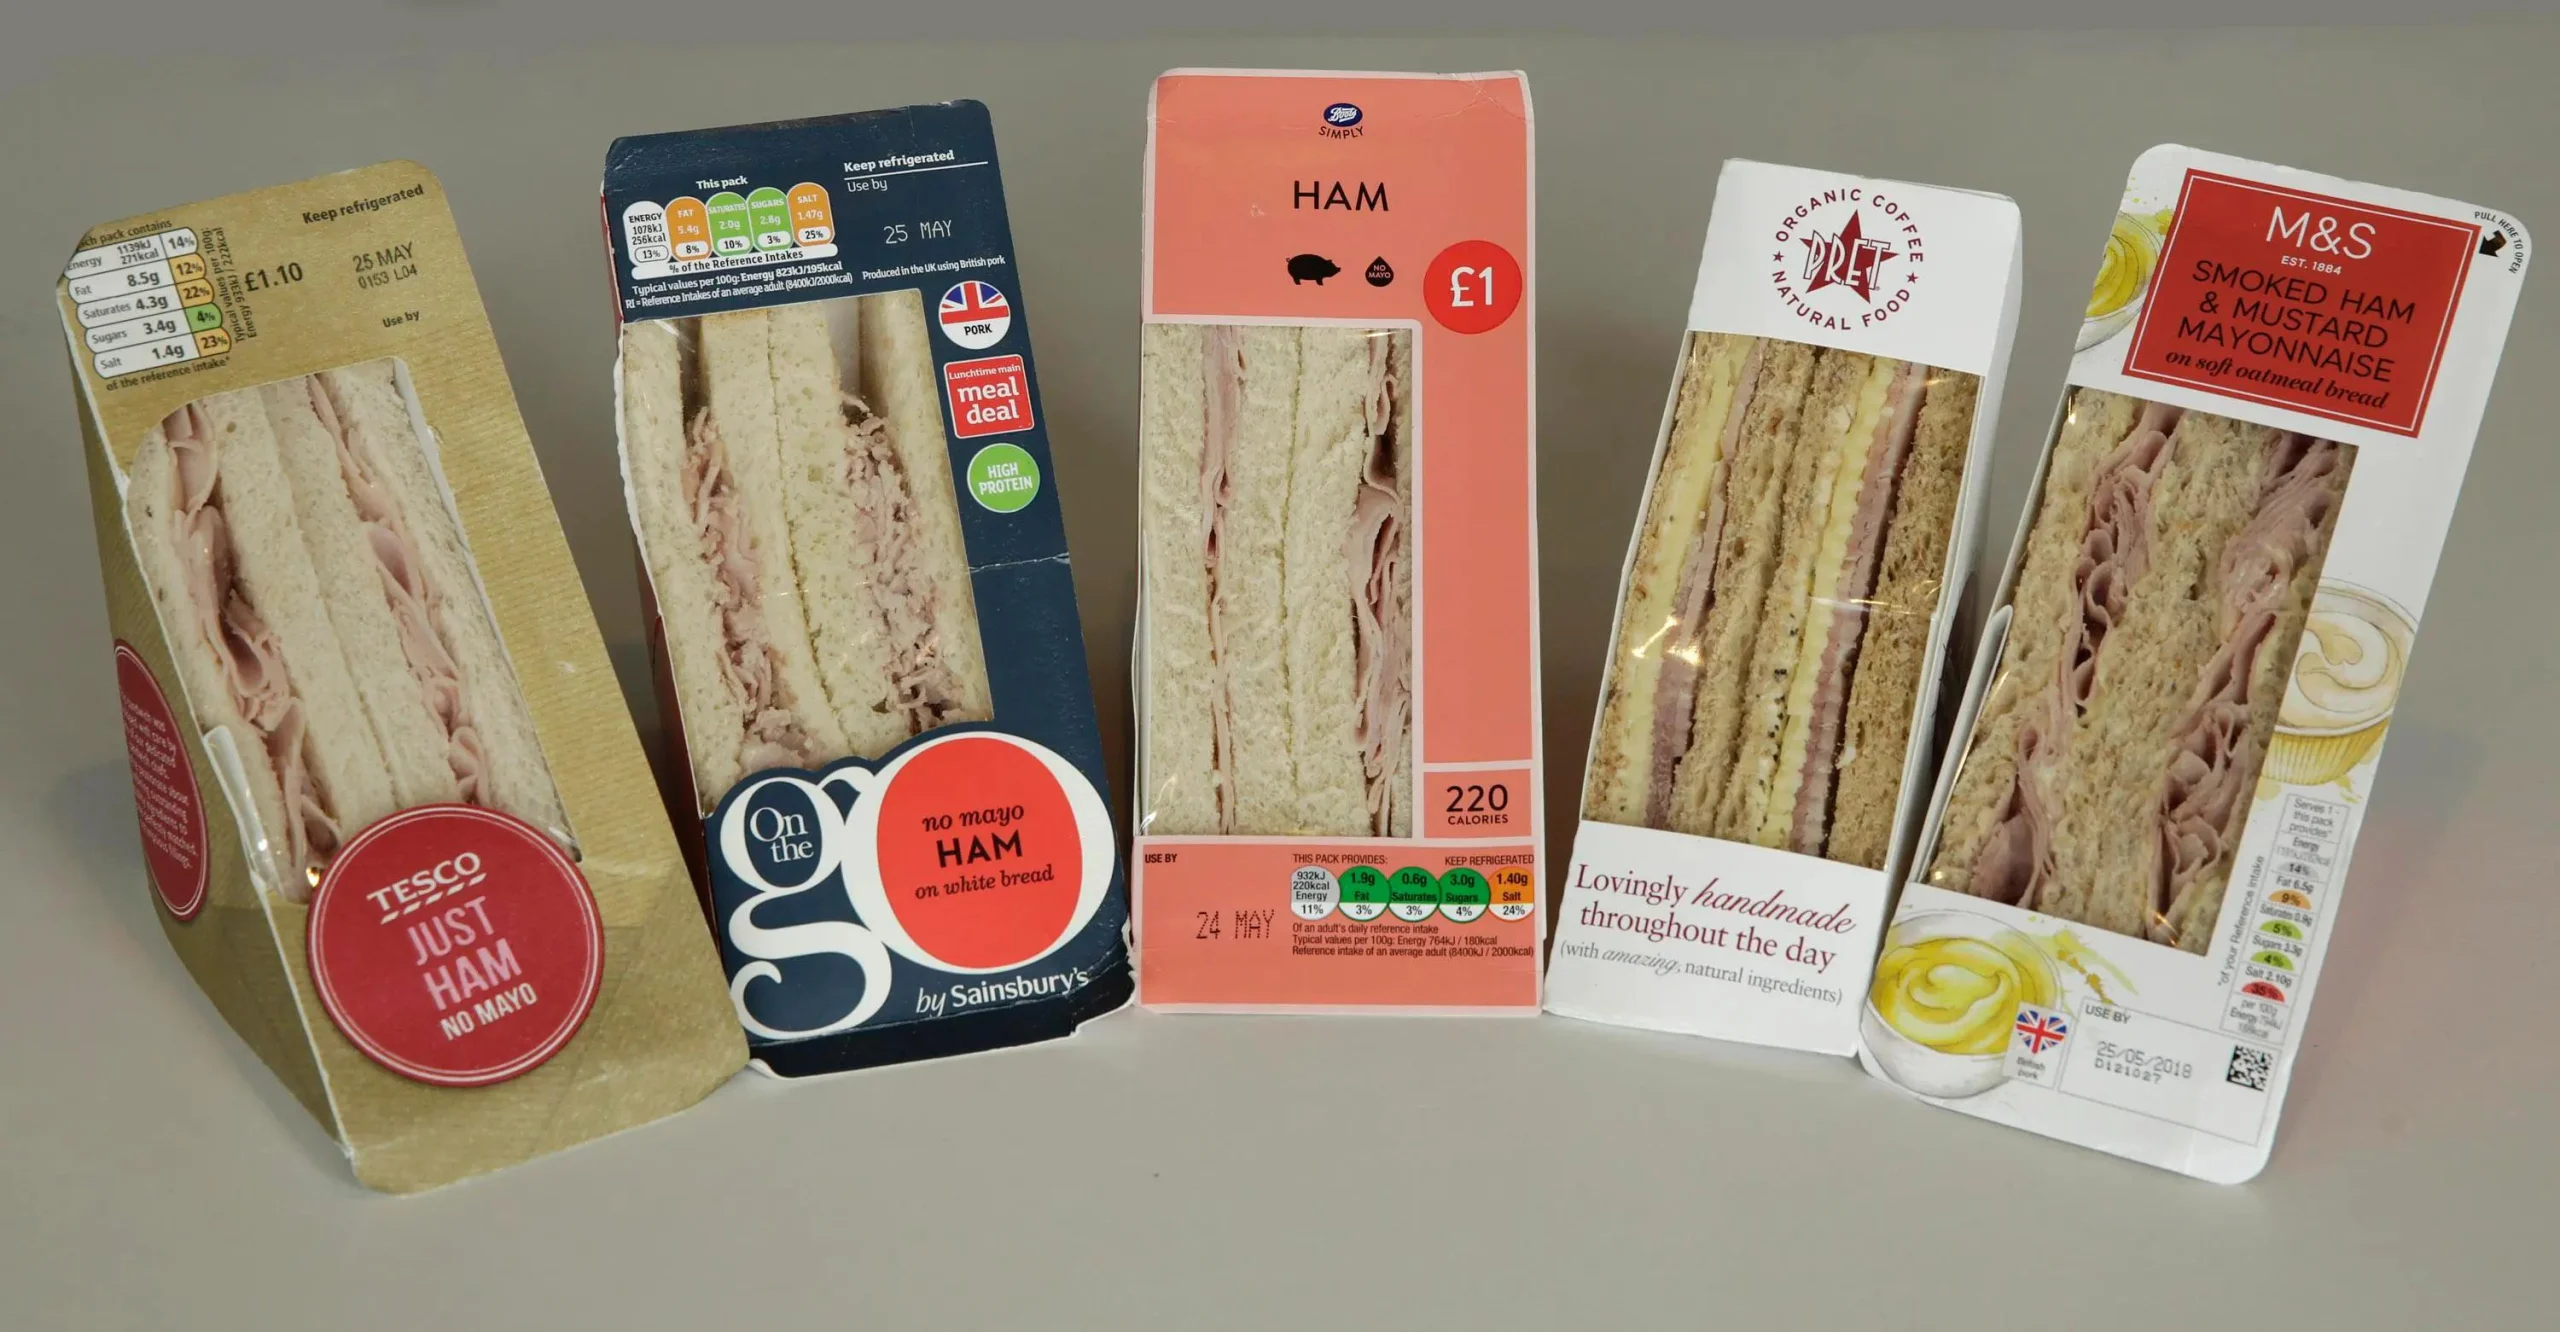 m&s smoked ham and mustard mayo sandwich - How many calories are in a M and S ham and mustard sandwich